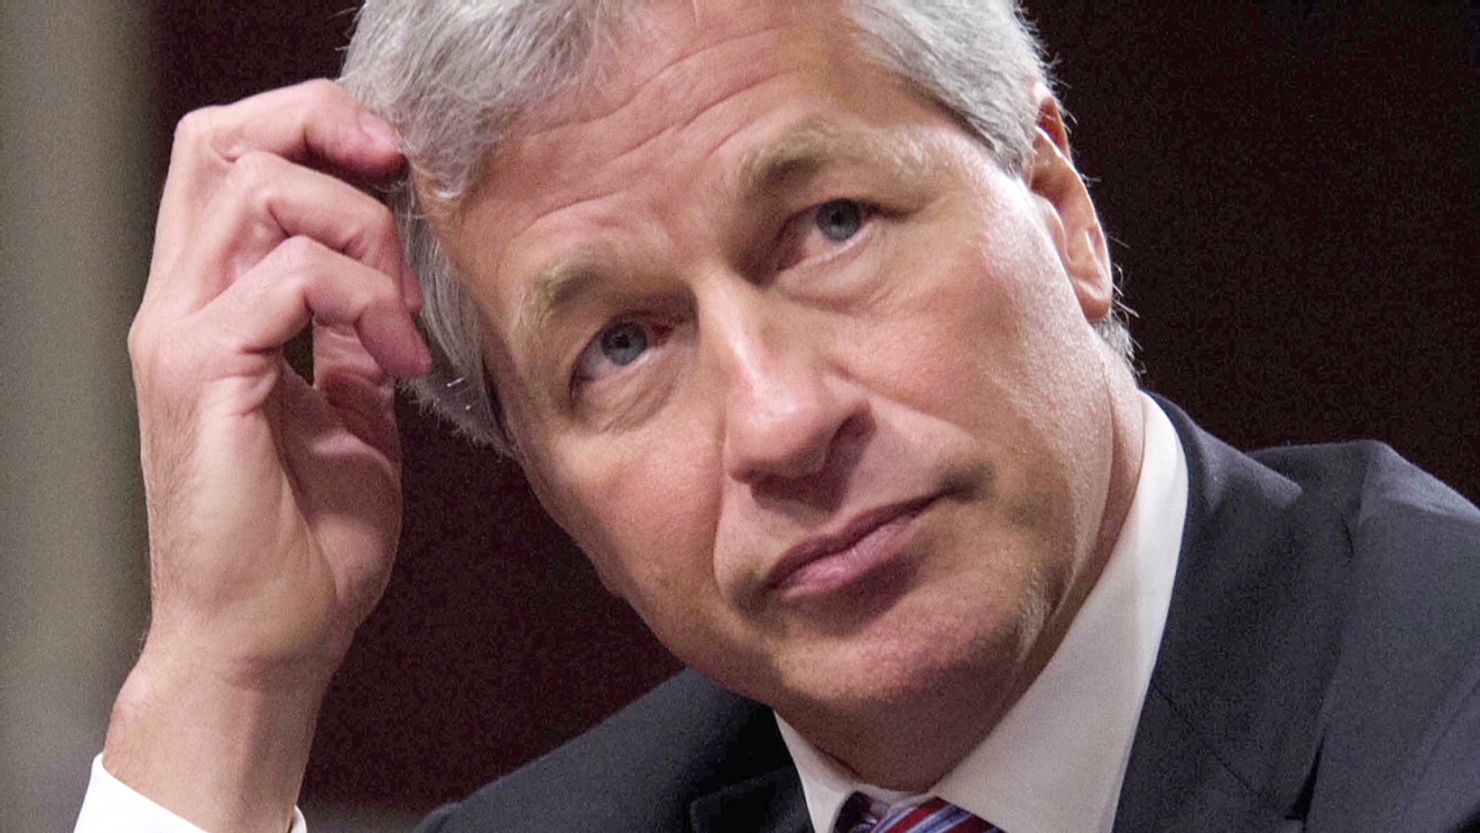 Pay of top bankers, including JPMorgan's Jamie Dimon, dropped an average of 10% last year, according to the Financial Times.